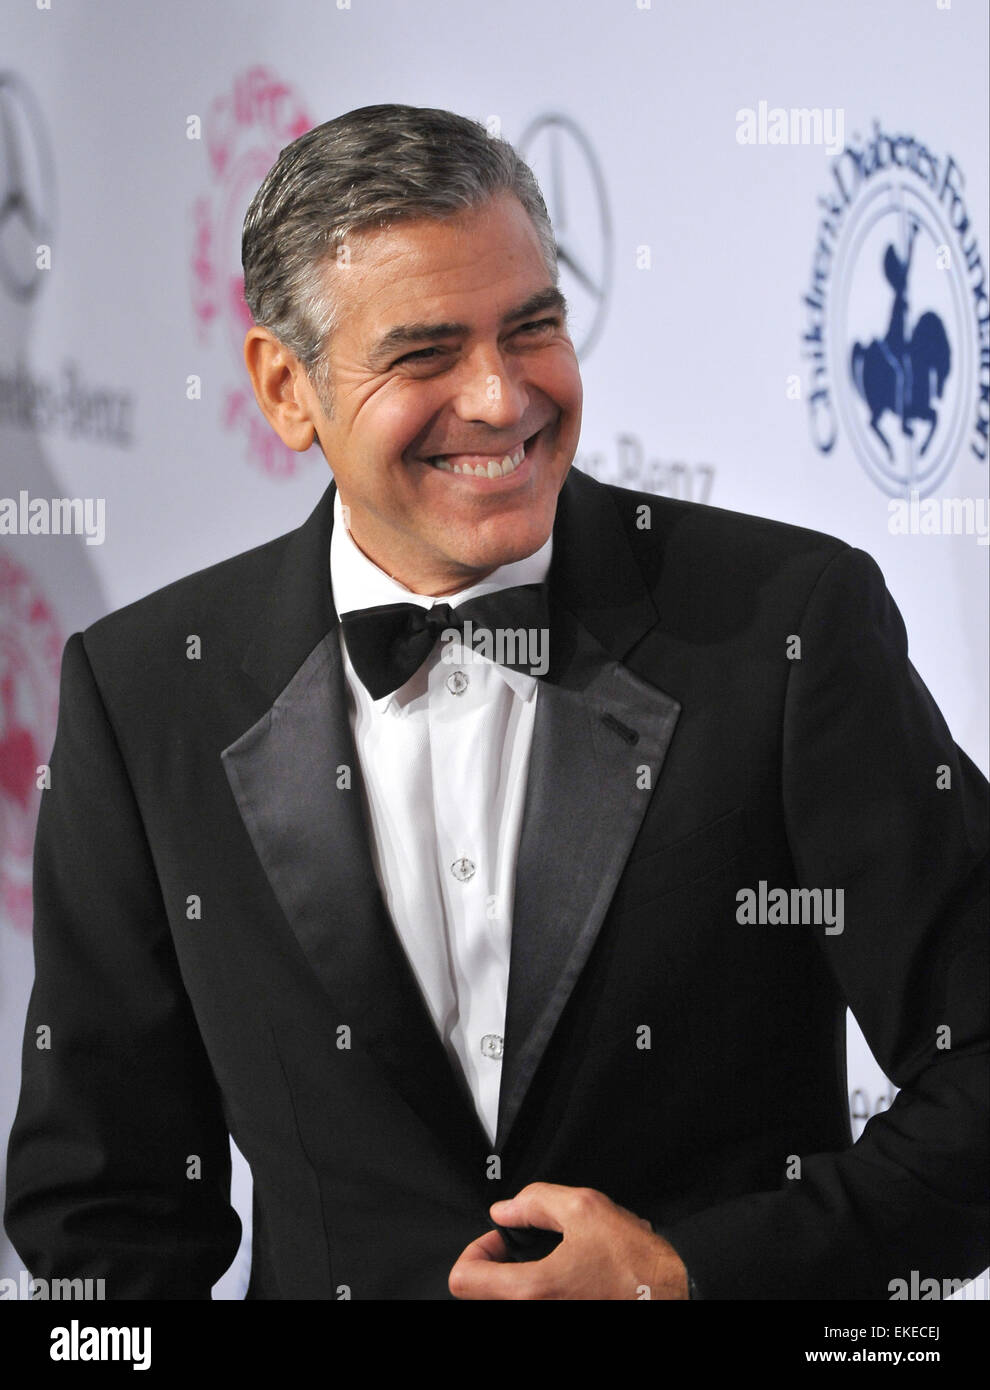 BEVERLY HILLS, CA - OCTOBER 20, 2012: George Clooney at the 26th Carousel of Hope Gala at the Beverly Hilton Hotel. Stock Photo